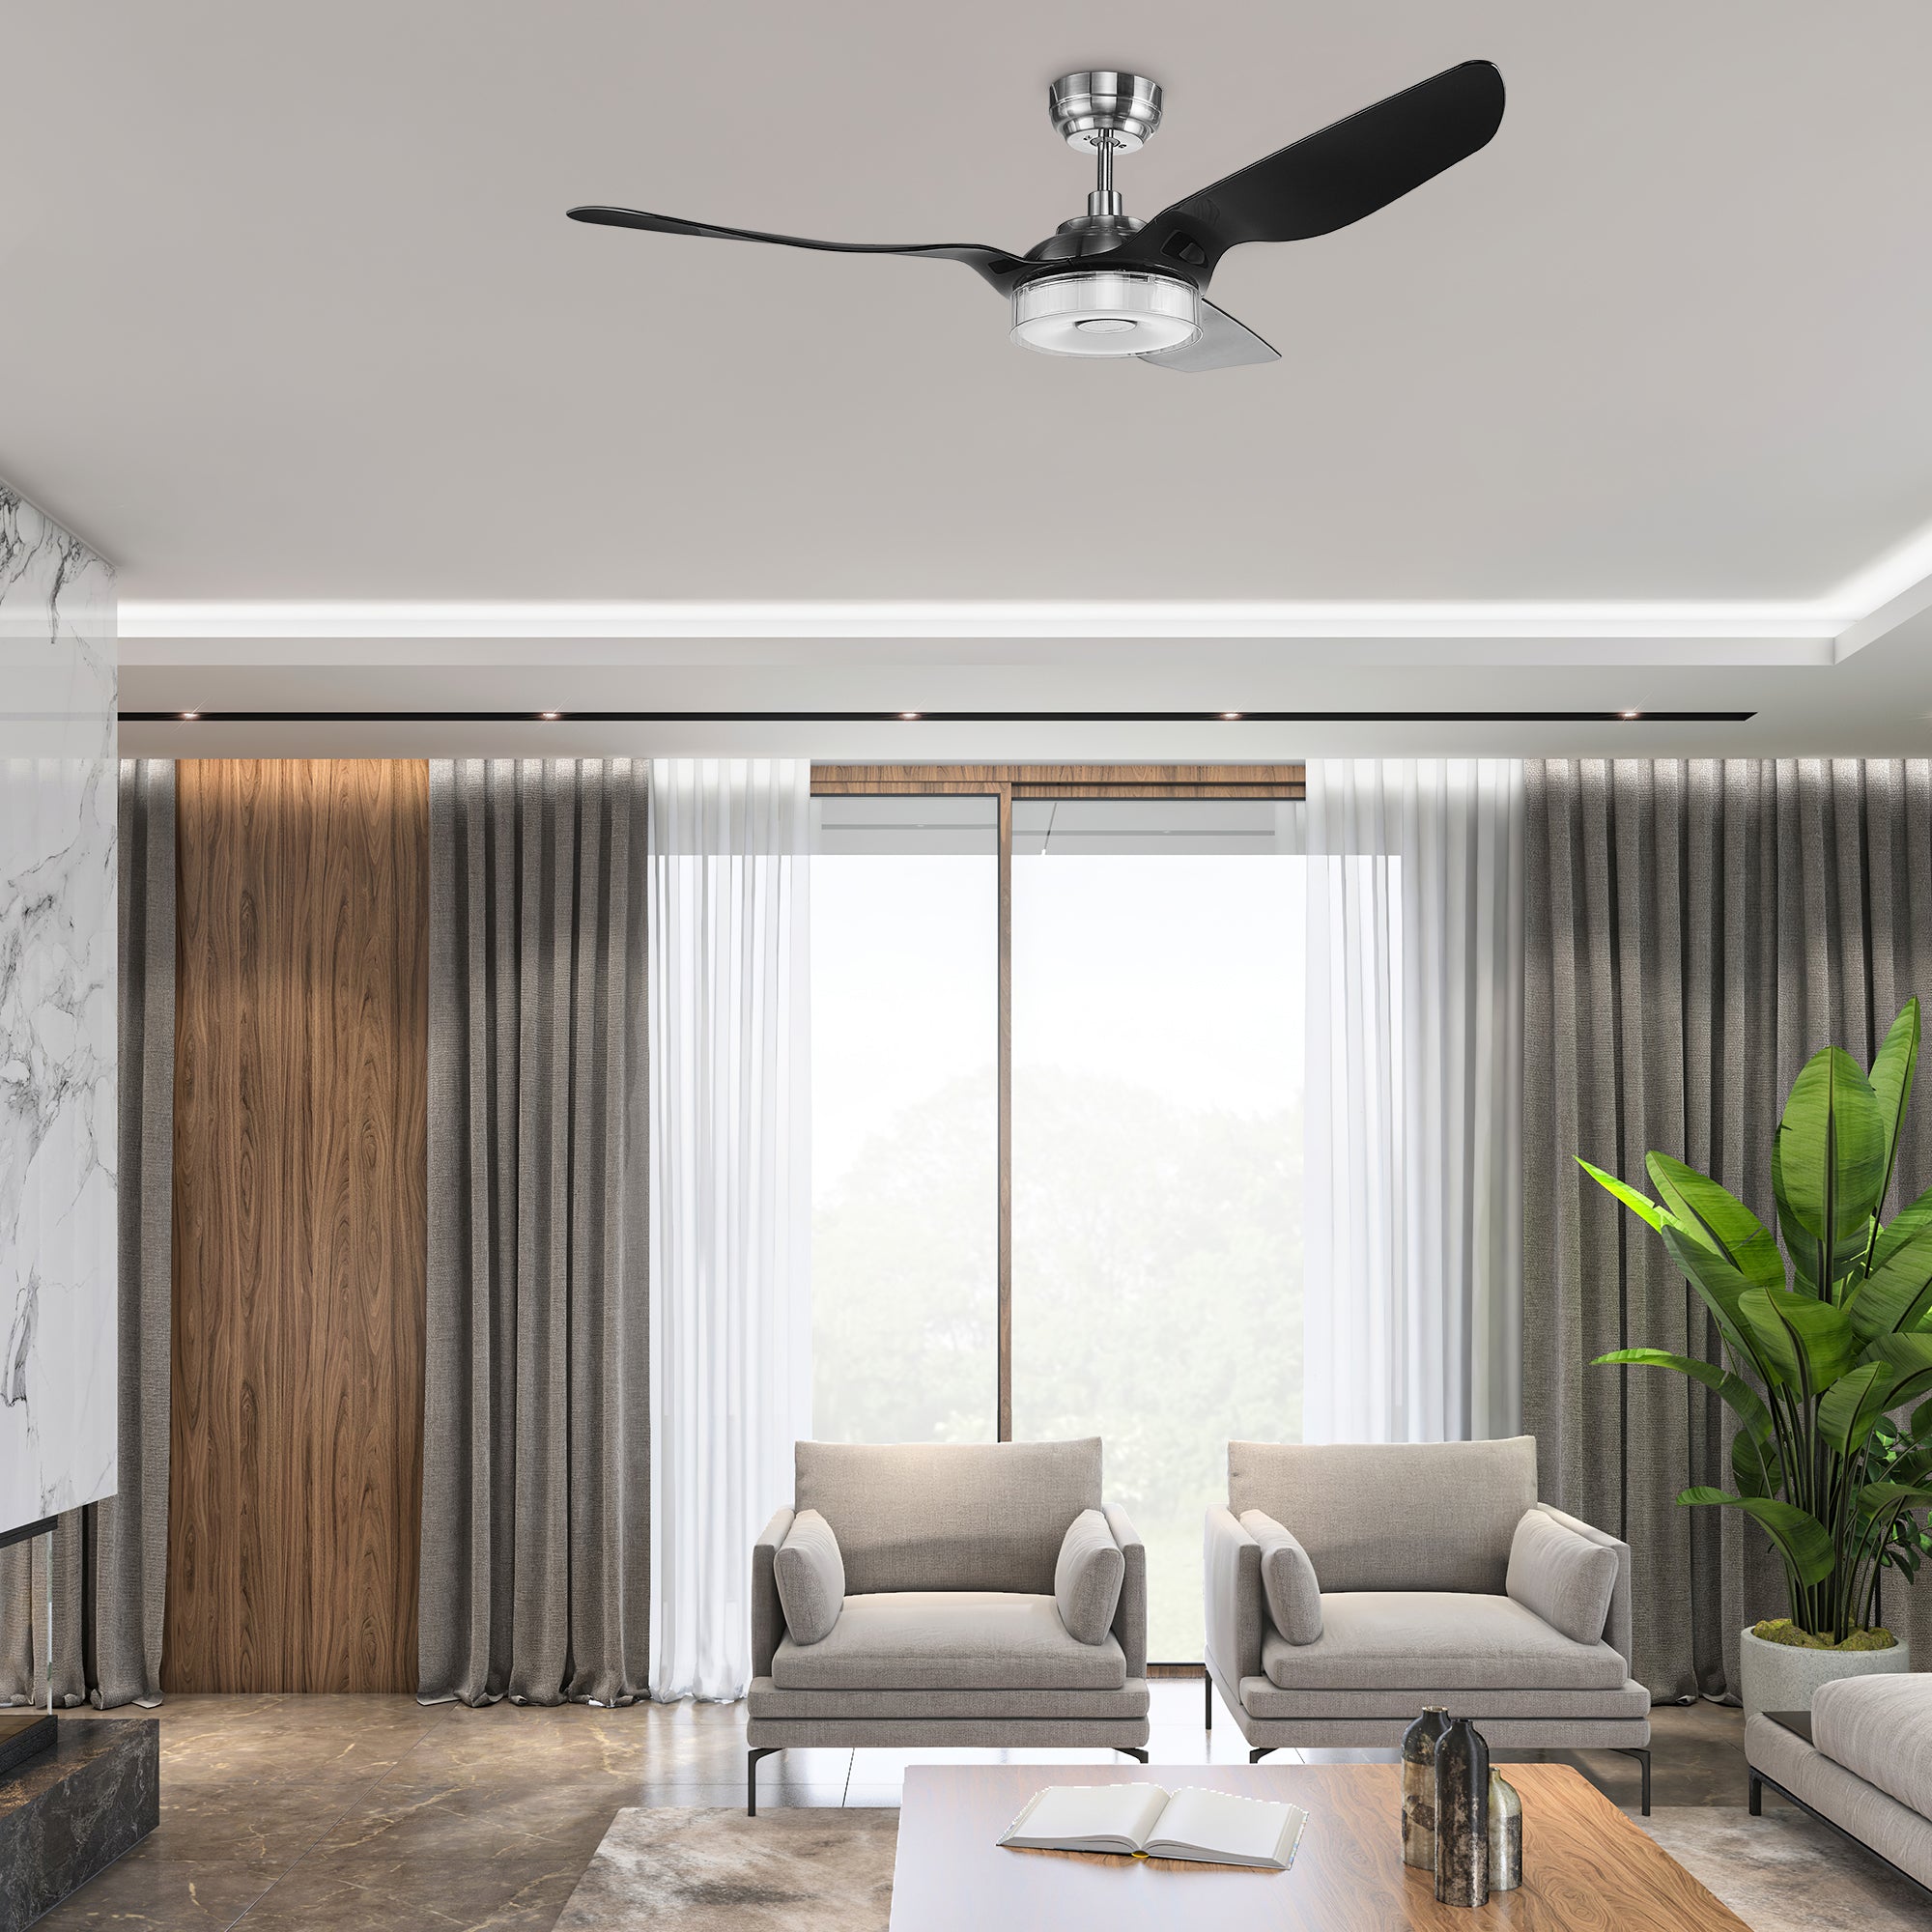 The Smafan 56&#39;&#39; Icebreaker smart fan delivers high and energy-efficient airflow in a sleek design. With dimmable integrated LED, 10-speed whisper-quiet DC motor, available remote, phone app, and voice integration control, and airfoils in classic white or black or clear, Icebreaker helps you enjoy your better life. 